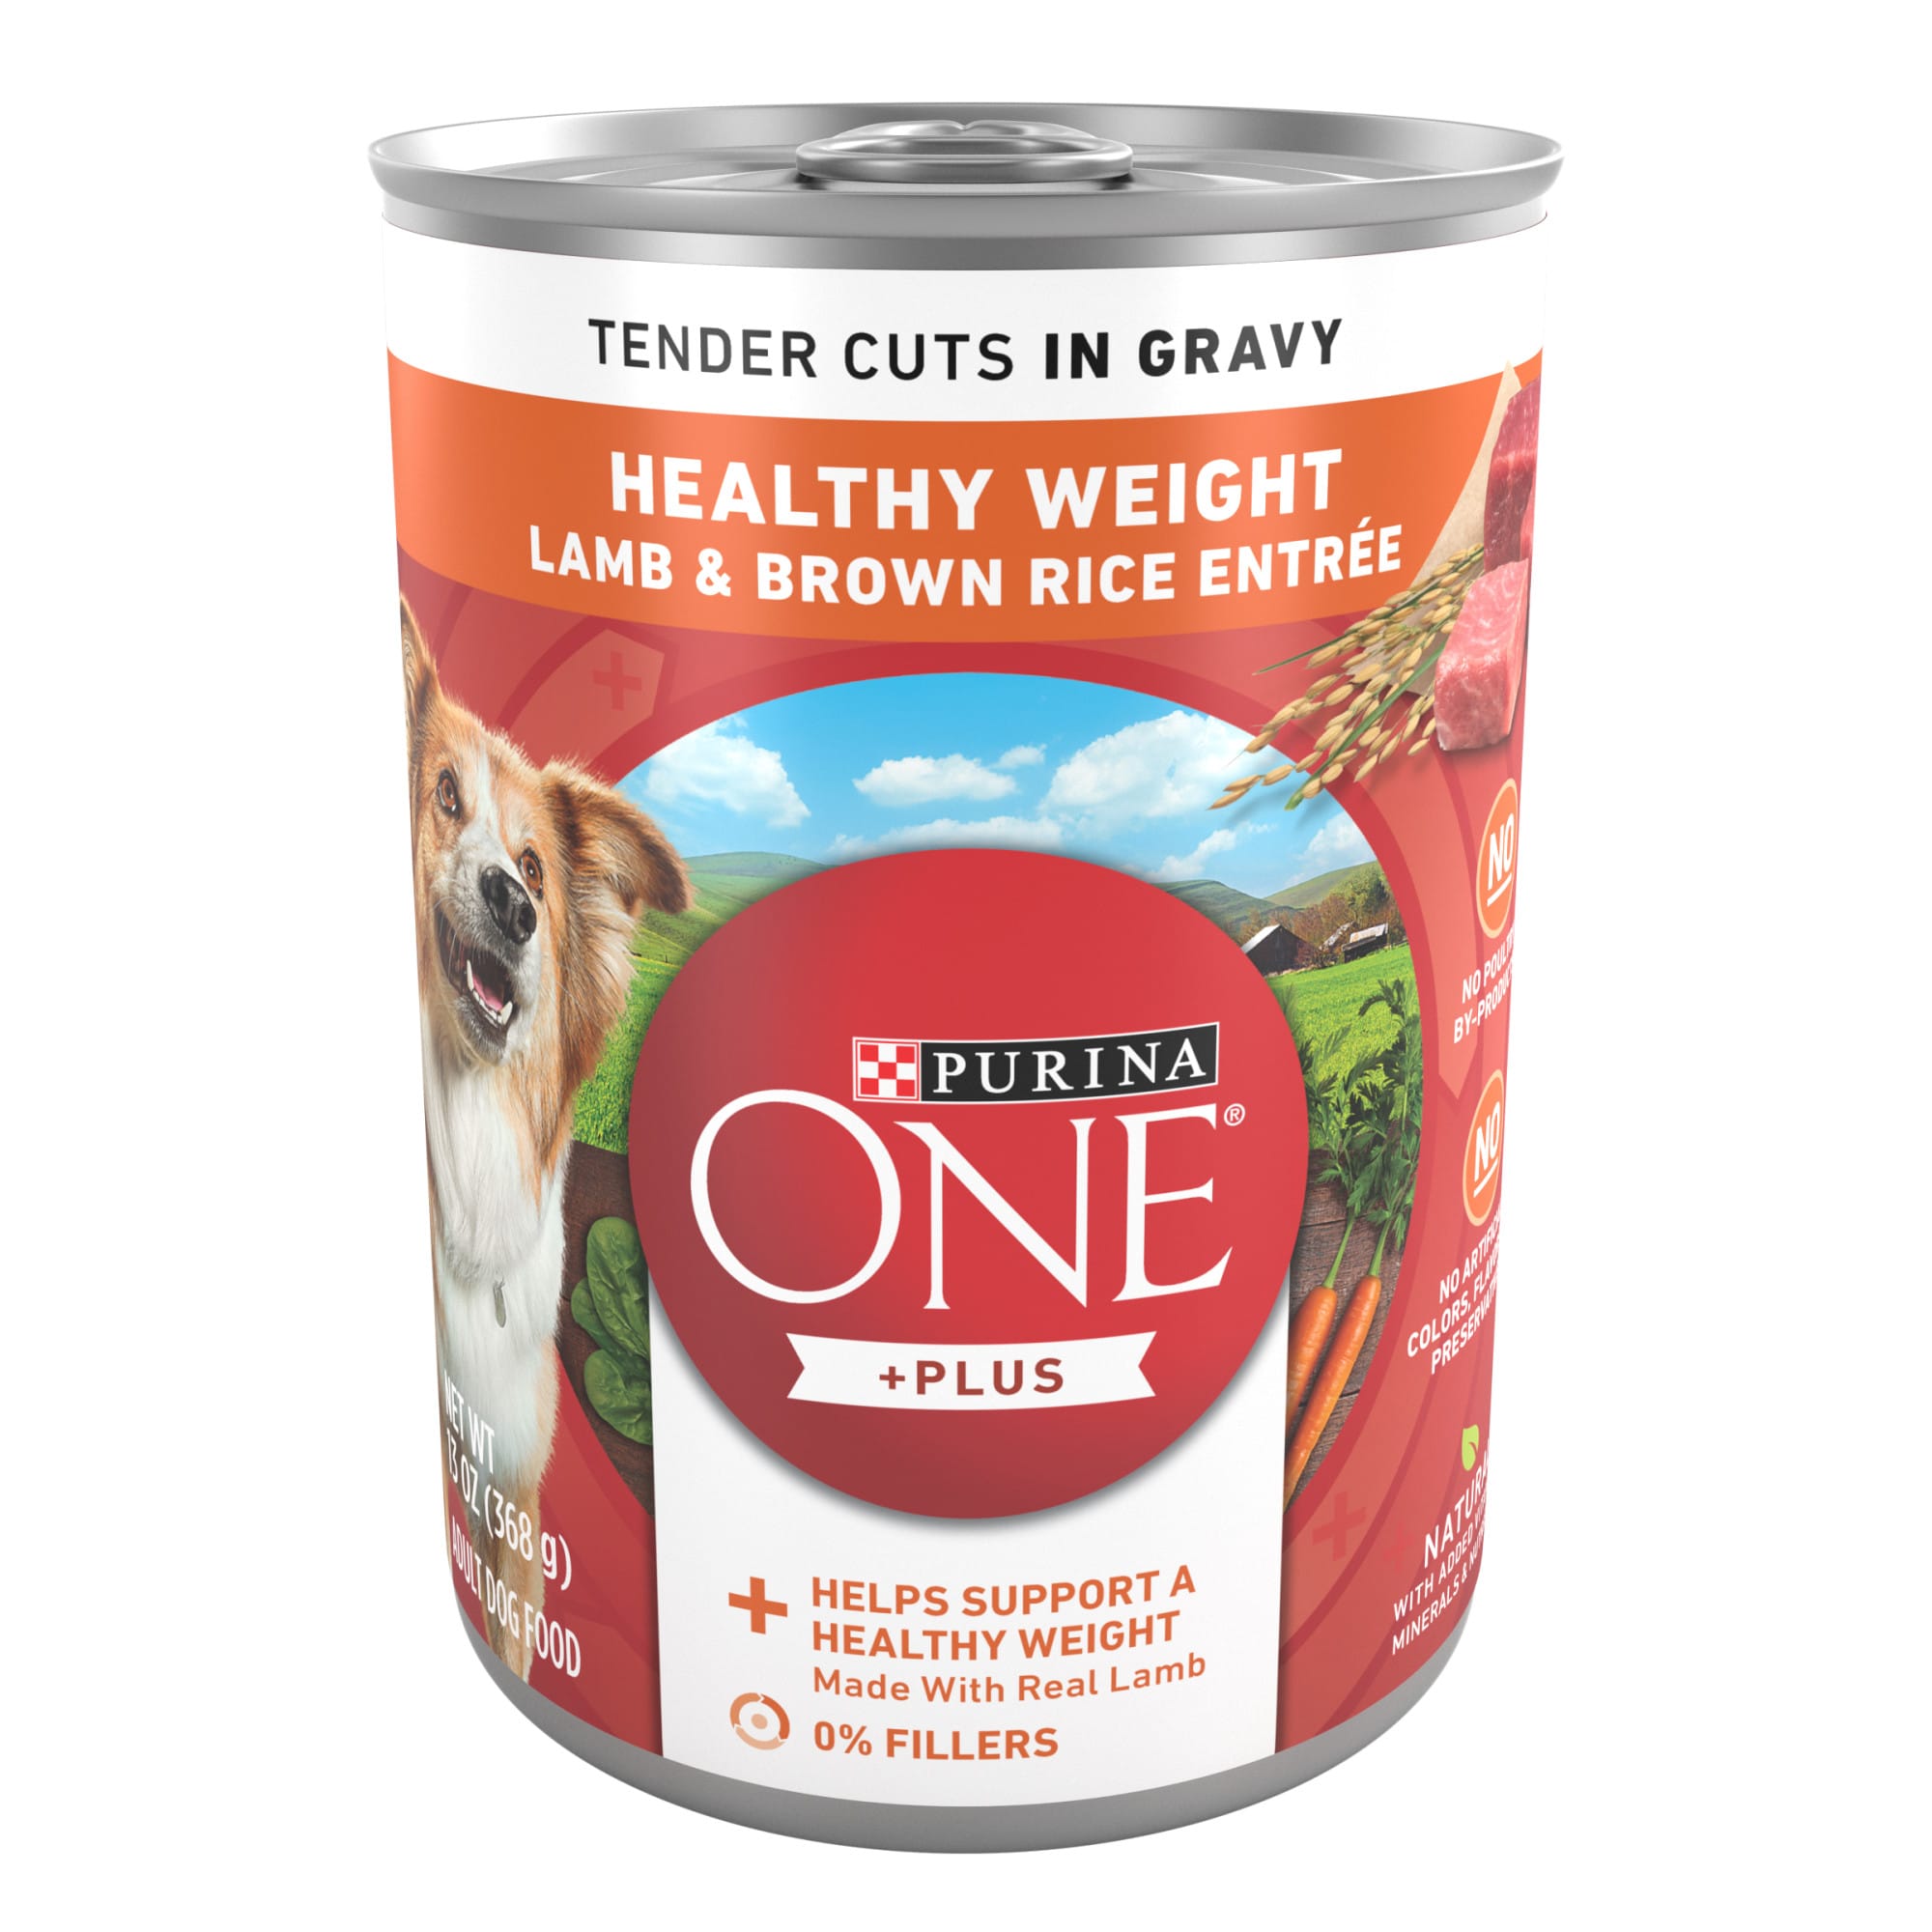 UPC 017800143127 product image for Purina ONE Plus Tender Cuts in Gravy Healthy Weight Lamb and Brown Rice Entree i | upcitemdb.com